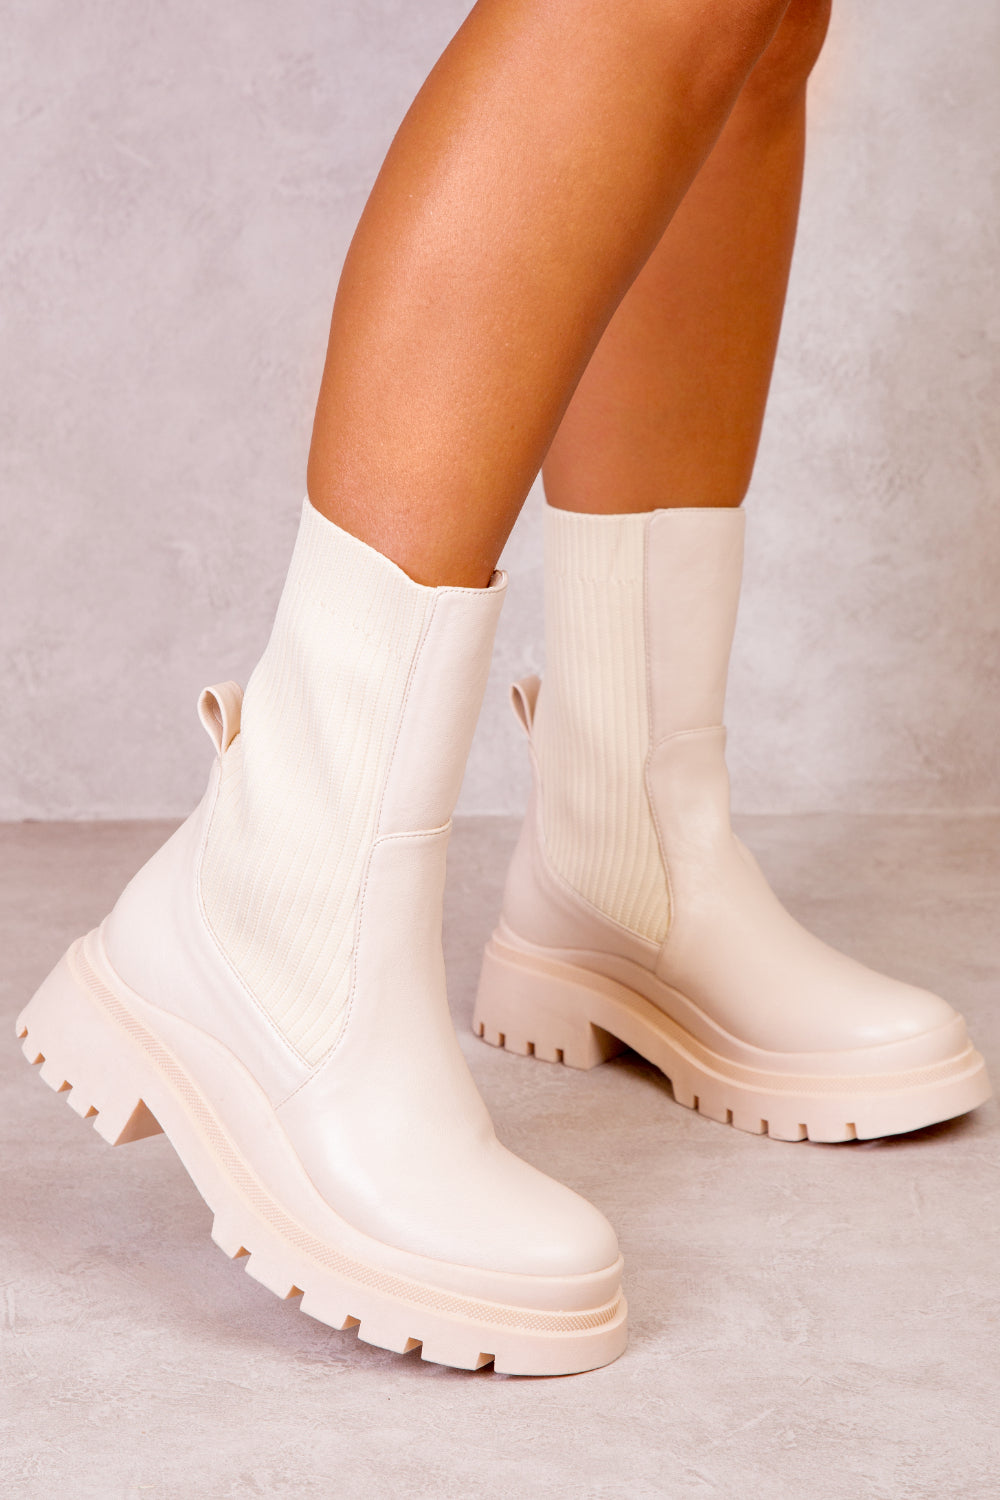 BECKY PU ANKLE BOOT WITH CHUNKY HEEL IN IVORY CREAM FAUX LEATHER